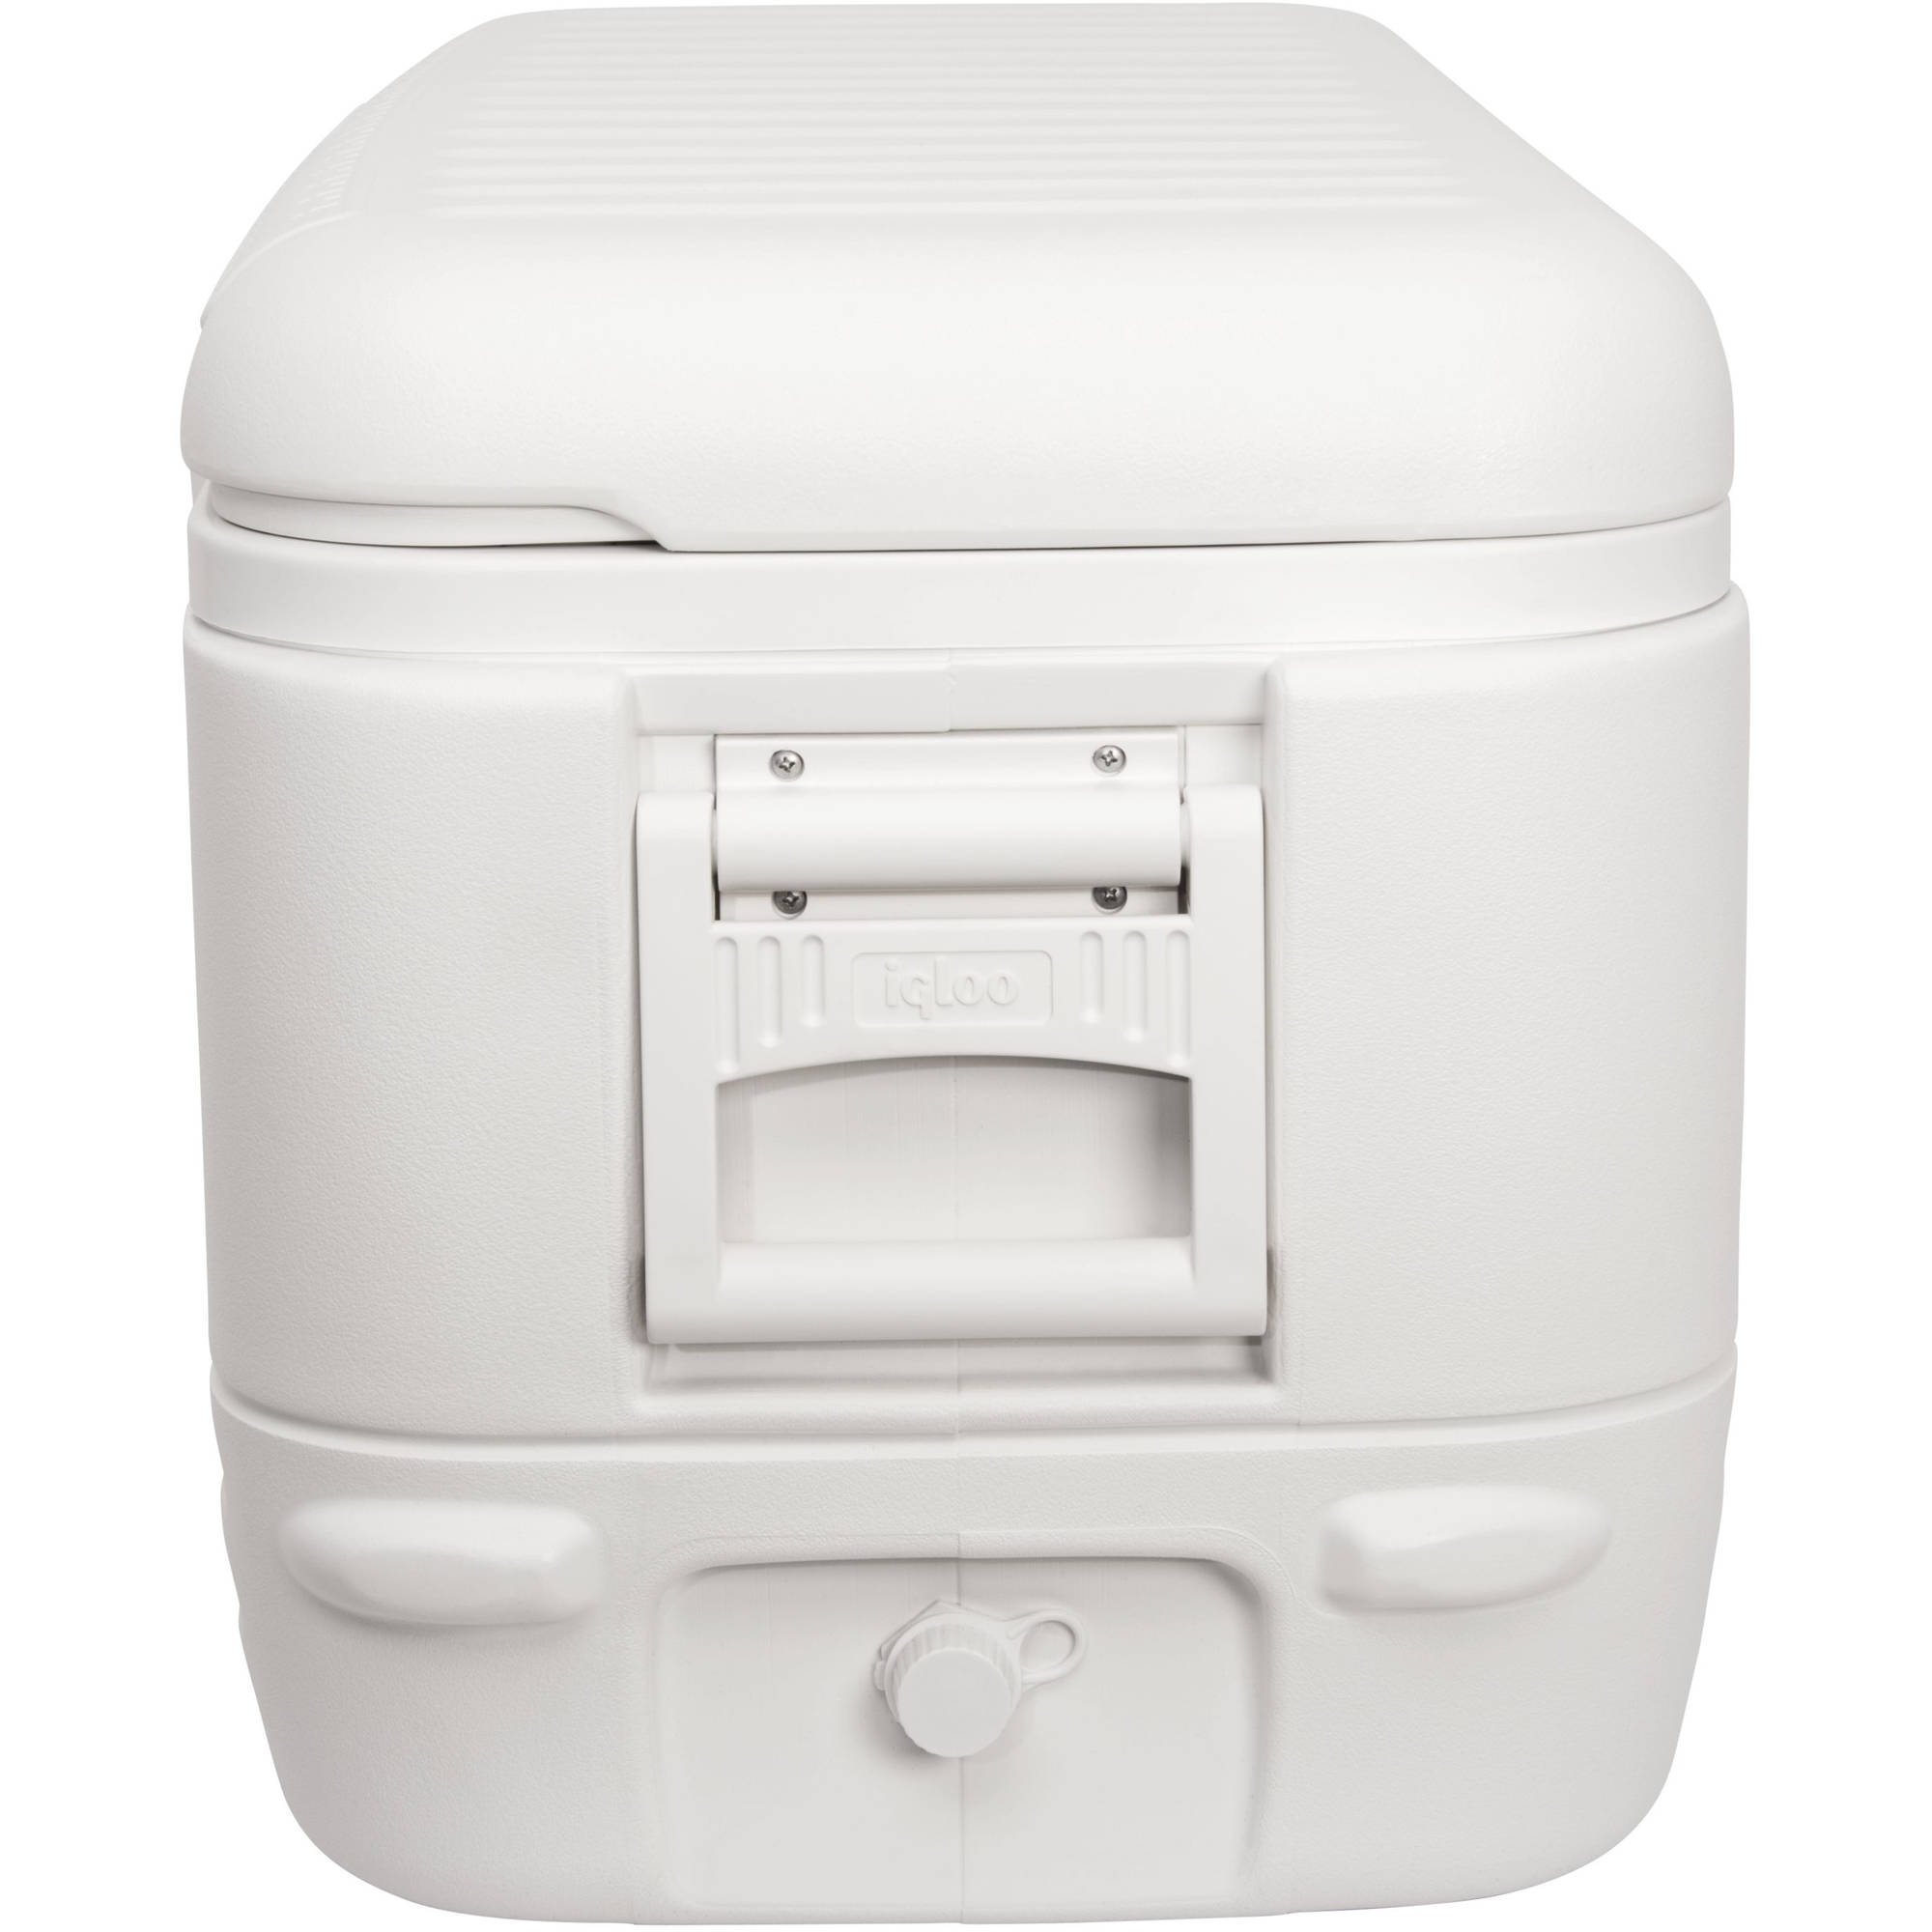 Igloo 120 qt. Quick & Cool Polar Ice Chest Cooler, White - image 2 of 18